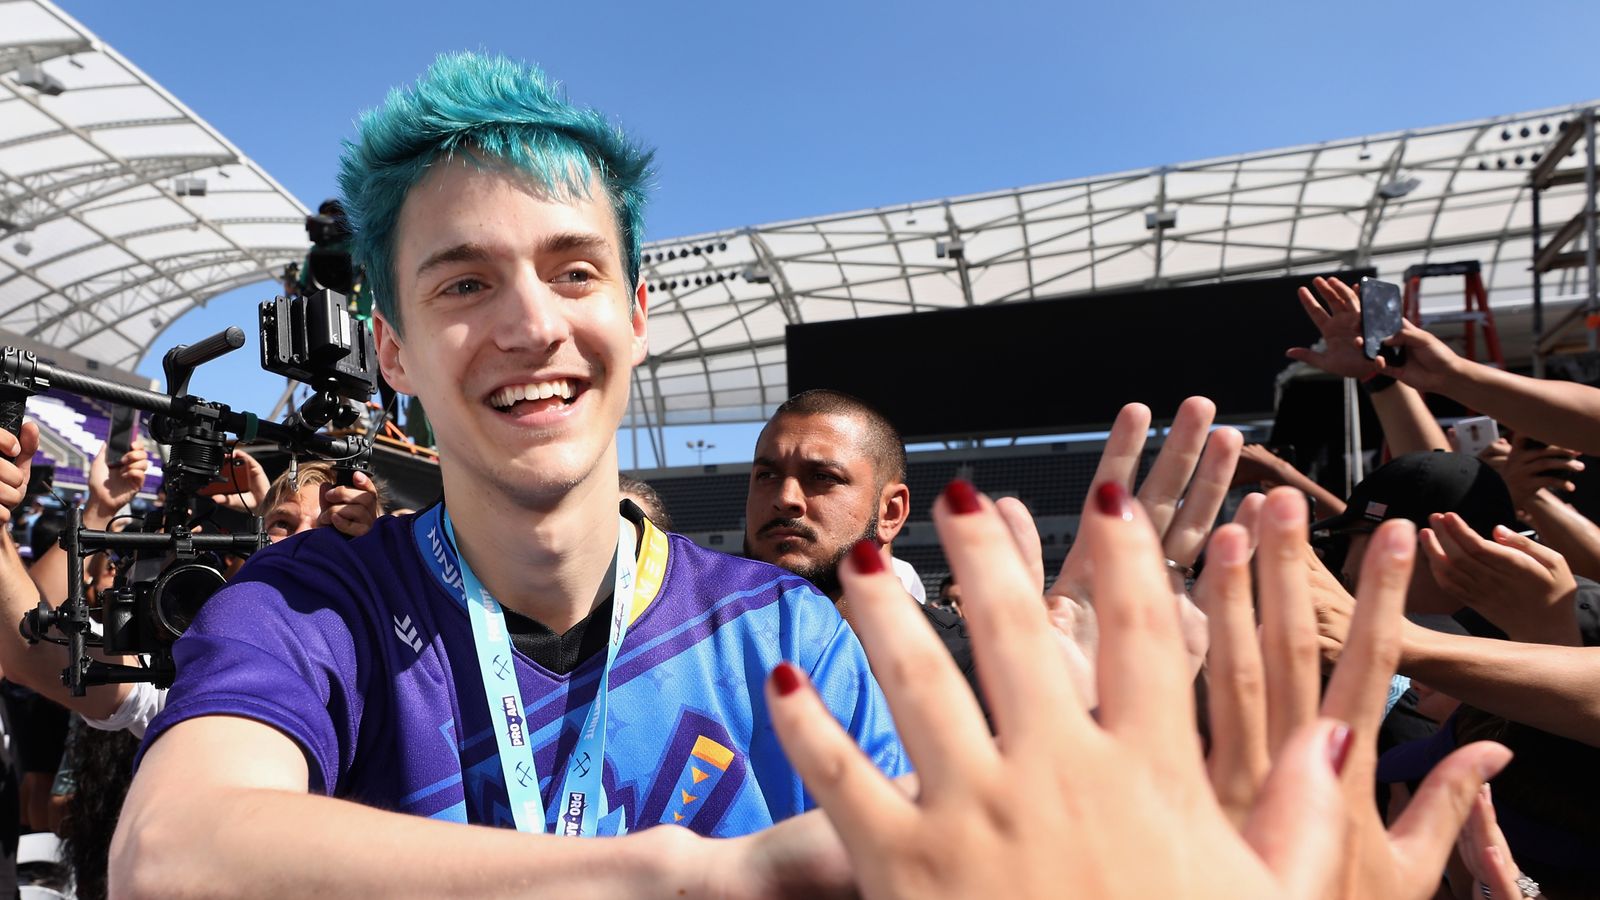 Fortnite Streamer Ninja Disgusted As Dormant Twitch Page Promotes